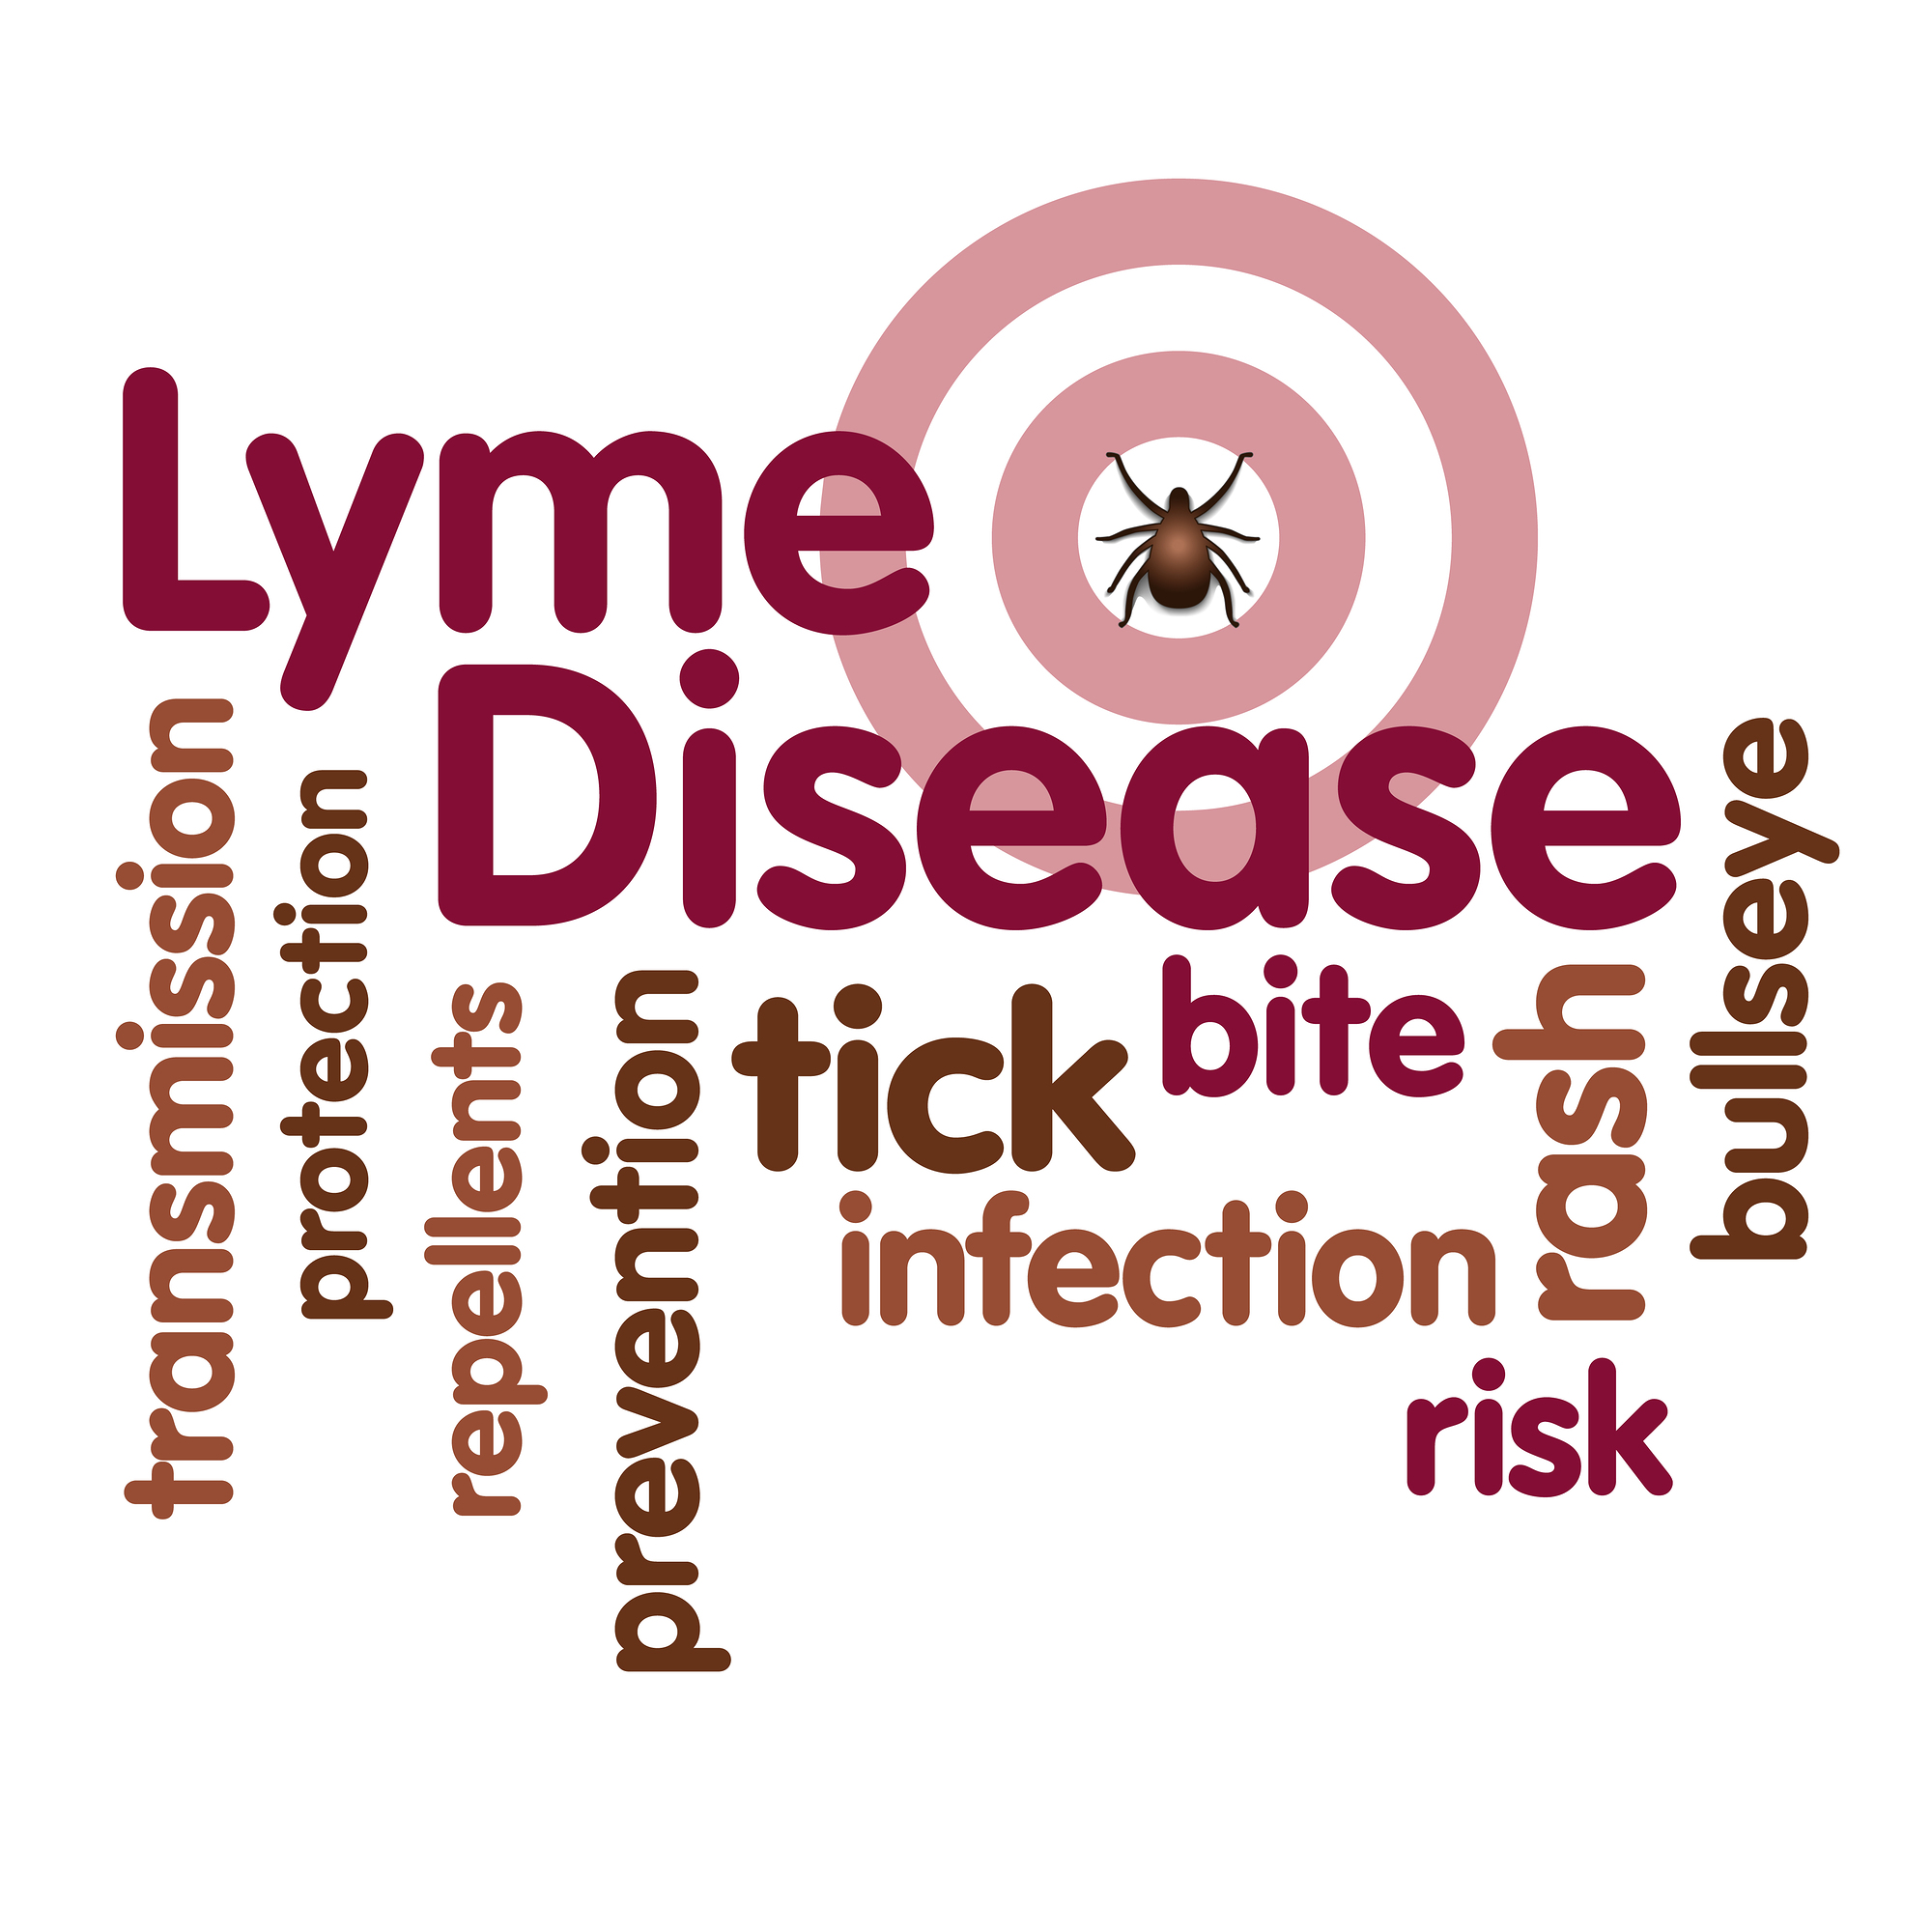 Lyme disease: Treatment is Crucial